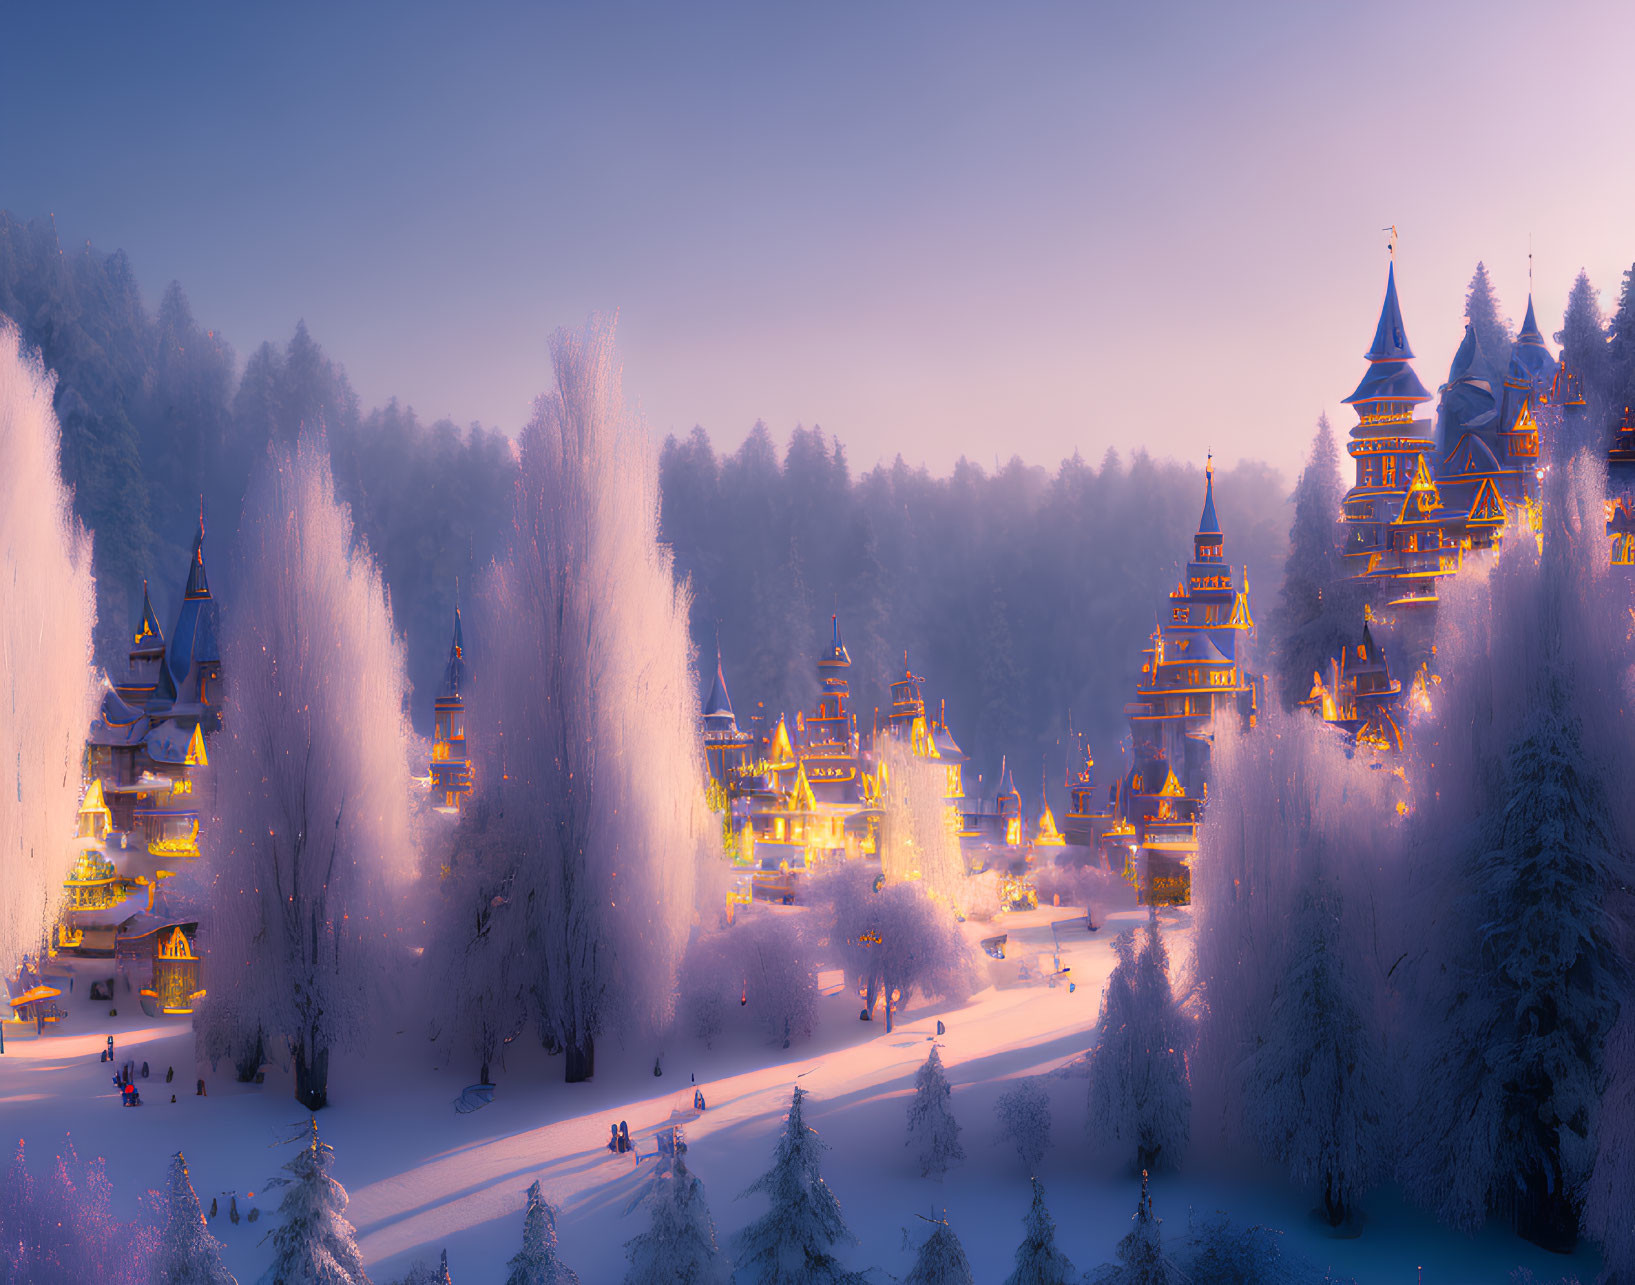 Enchanting Winter Village Scene with Illuminated Buildings and Snow-Covered Trees